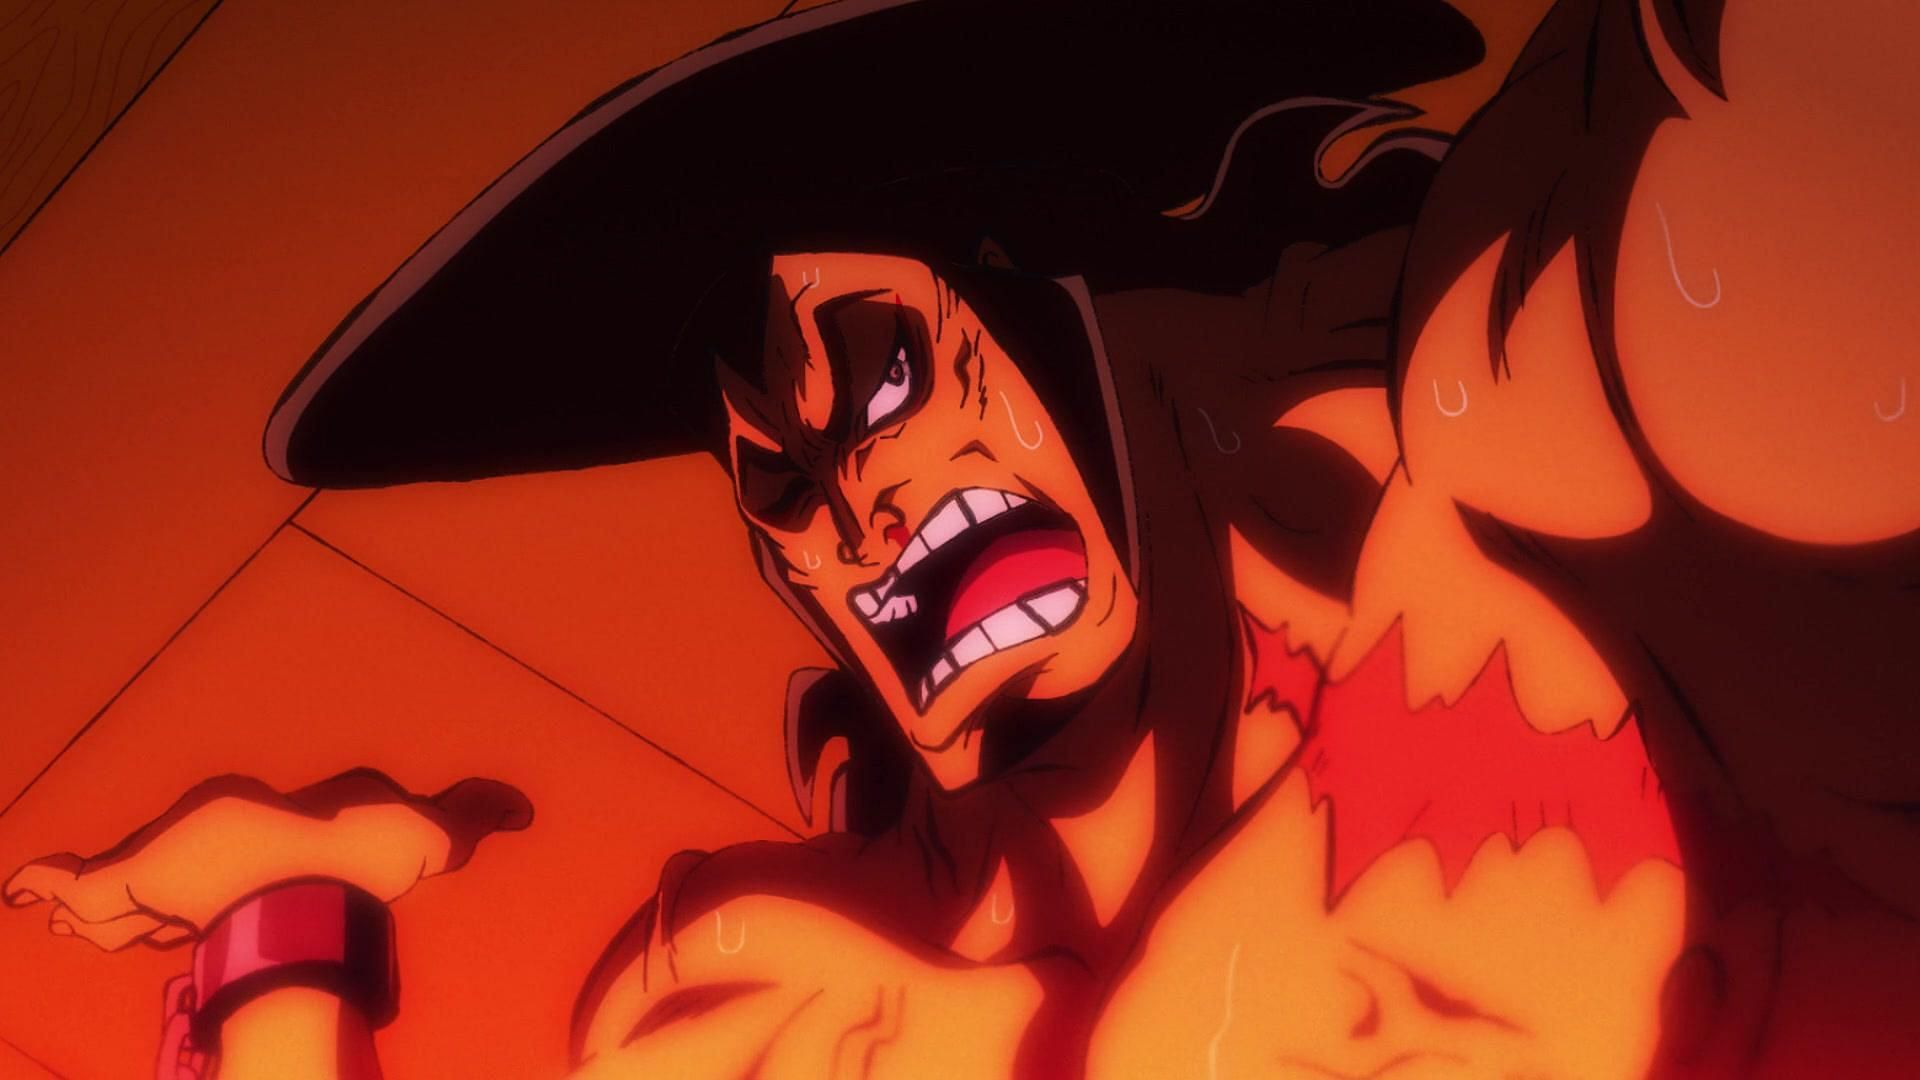 Oden as seen in One Piece (Image via Toei Animation, One Piece)